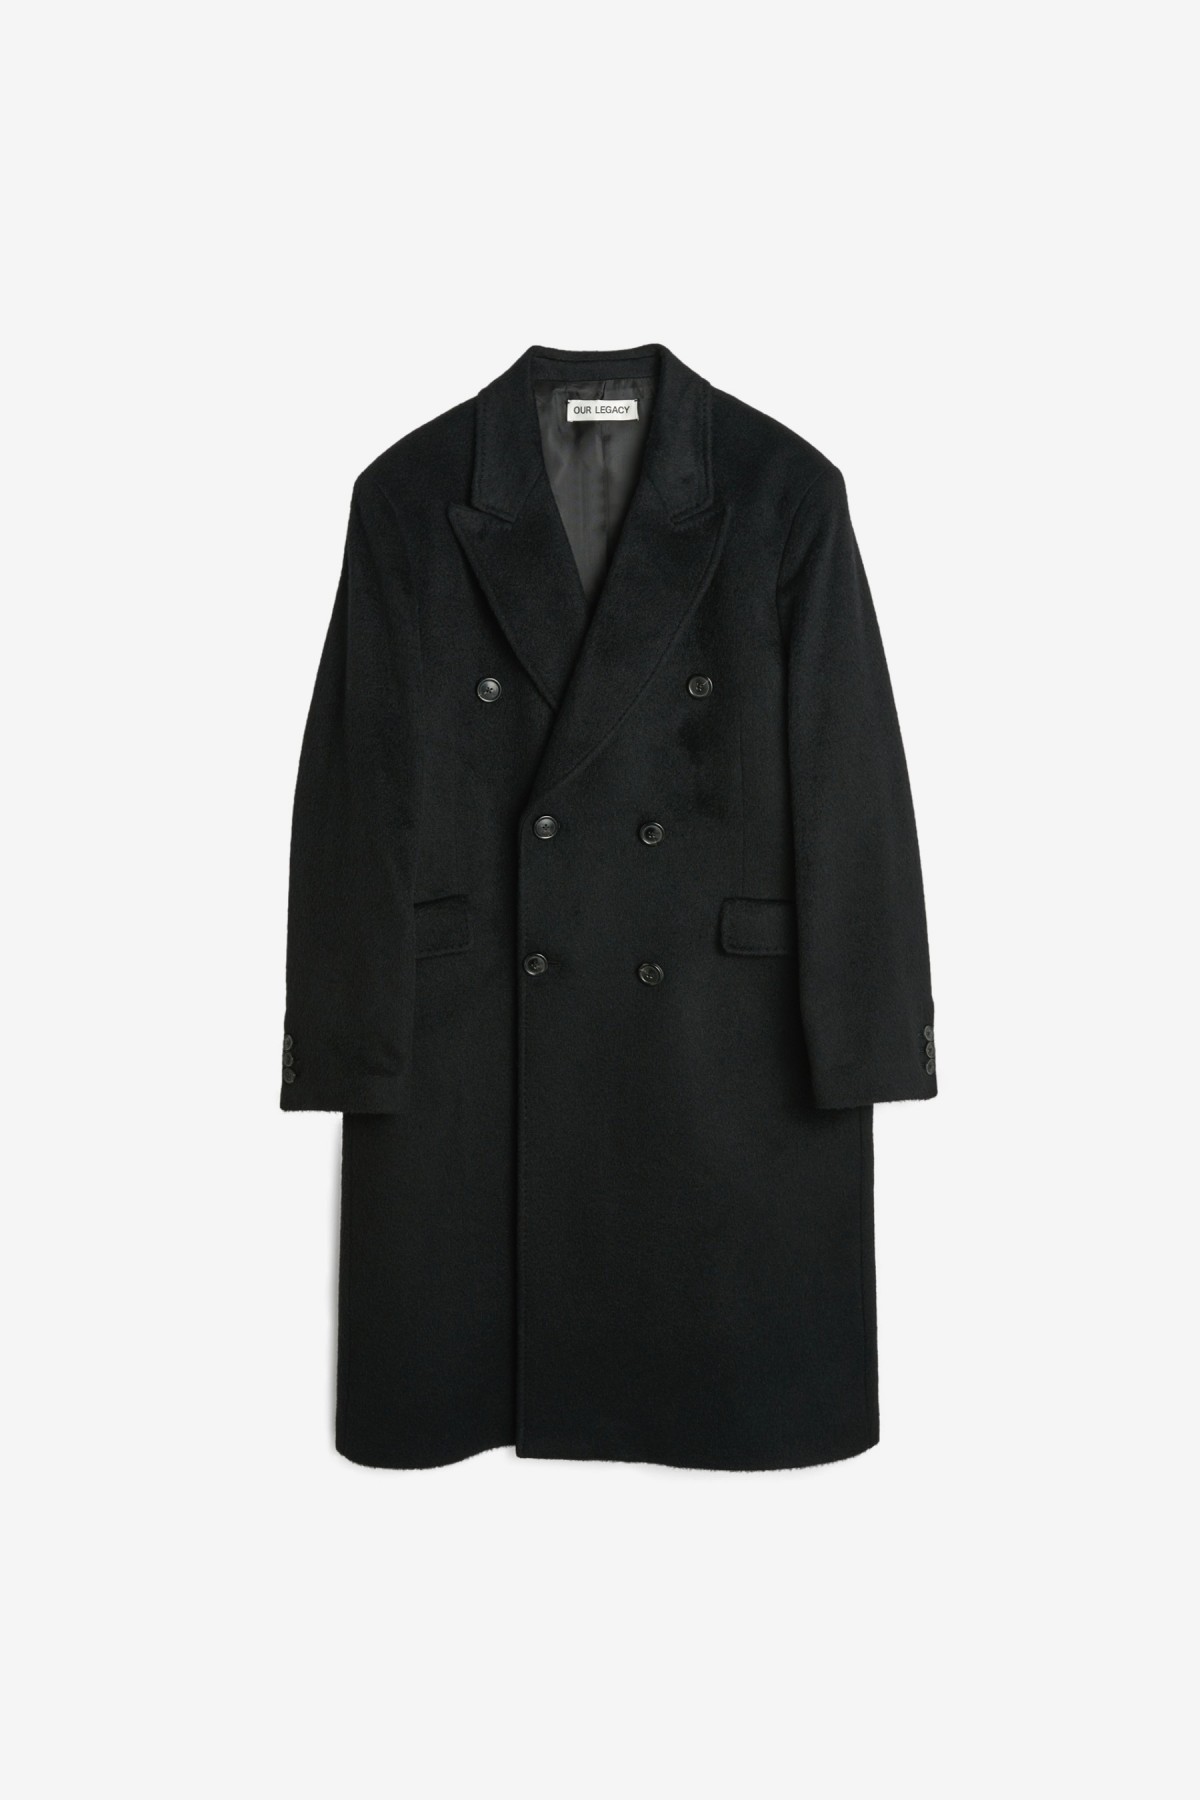 Our Legacy Whale Coat in Black Hairy Wool